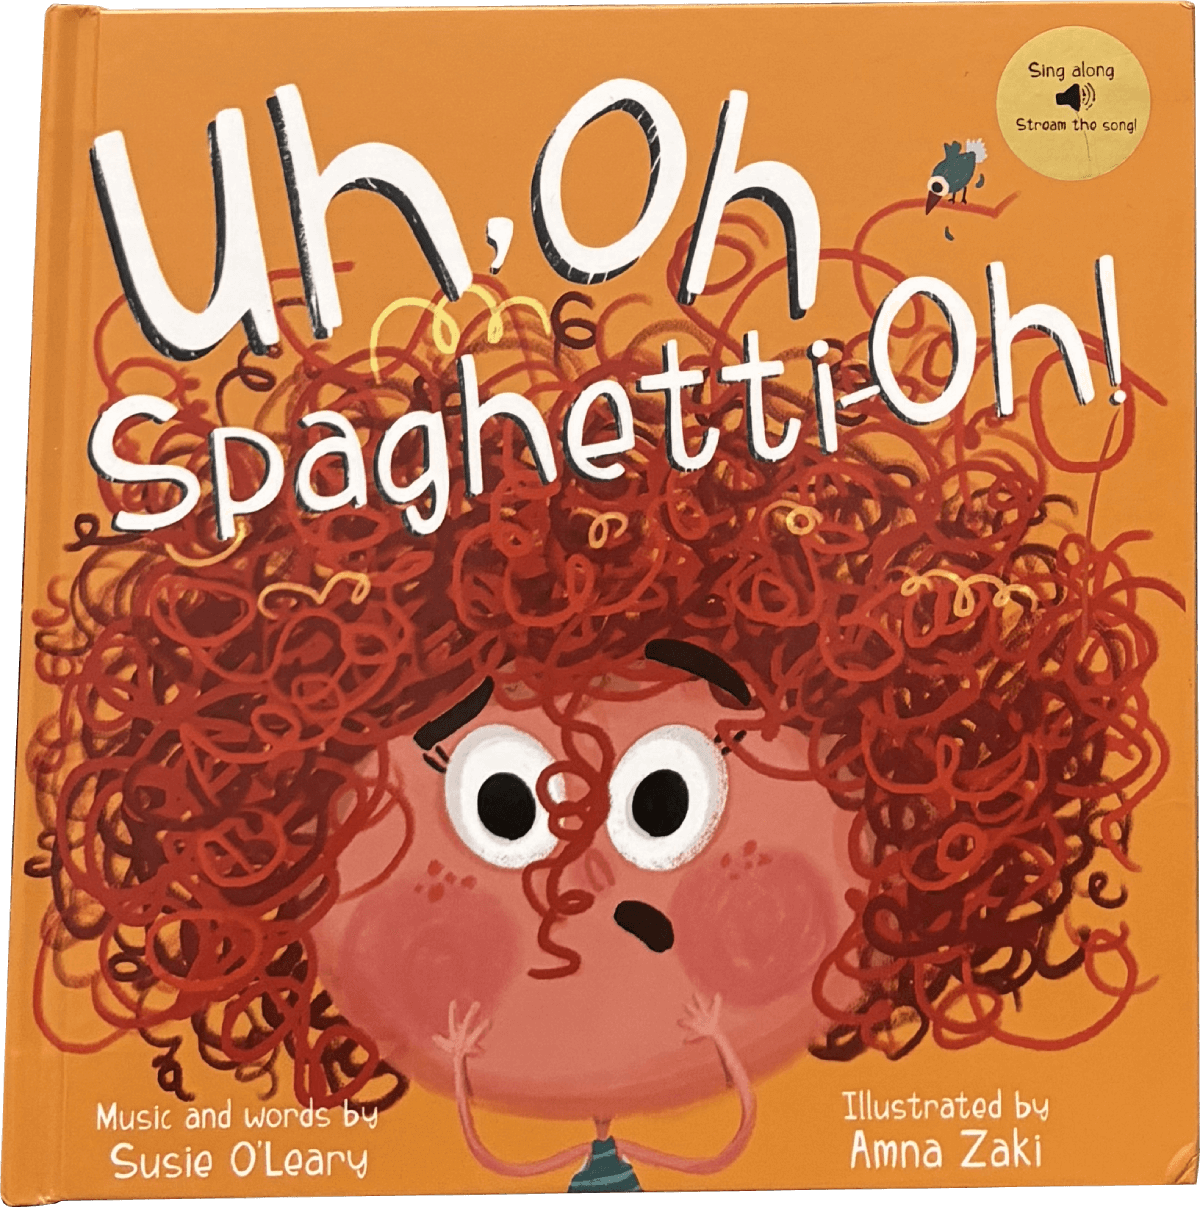 Uh Oh Spaghetti-oh out now!